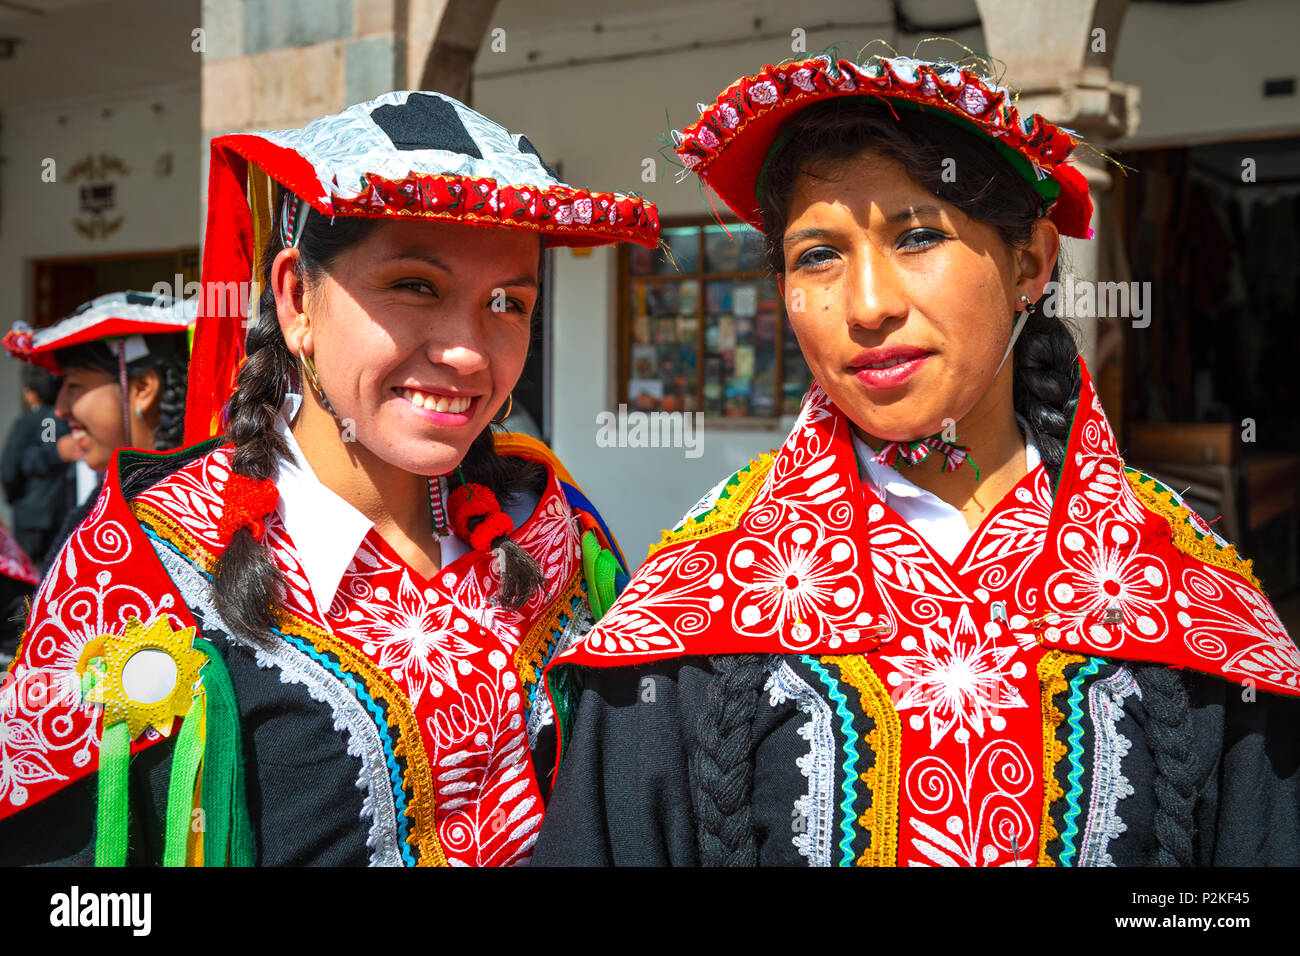 Portrait of two smiling indigenous Quechua ladies in traditional clothing during the Inti Rayme Sun Festival celebrations in Cusco, Peru. Stock Photo